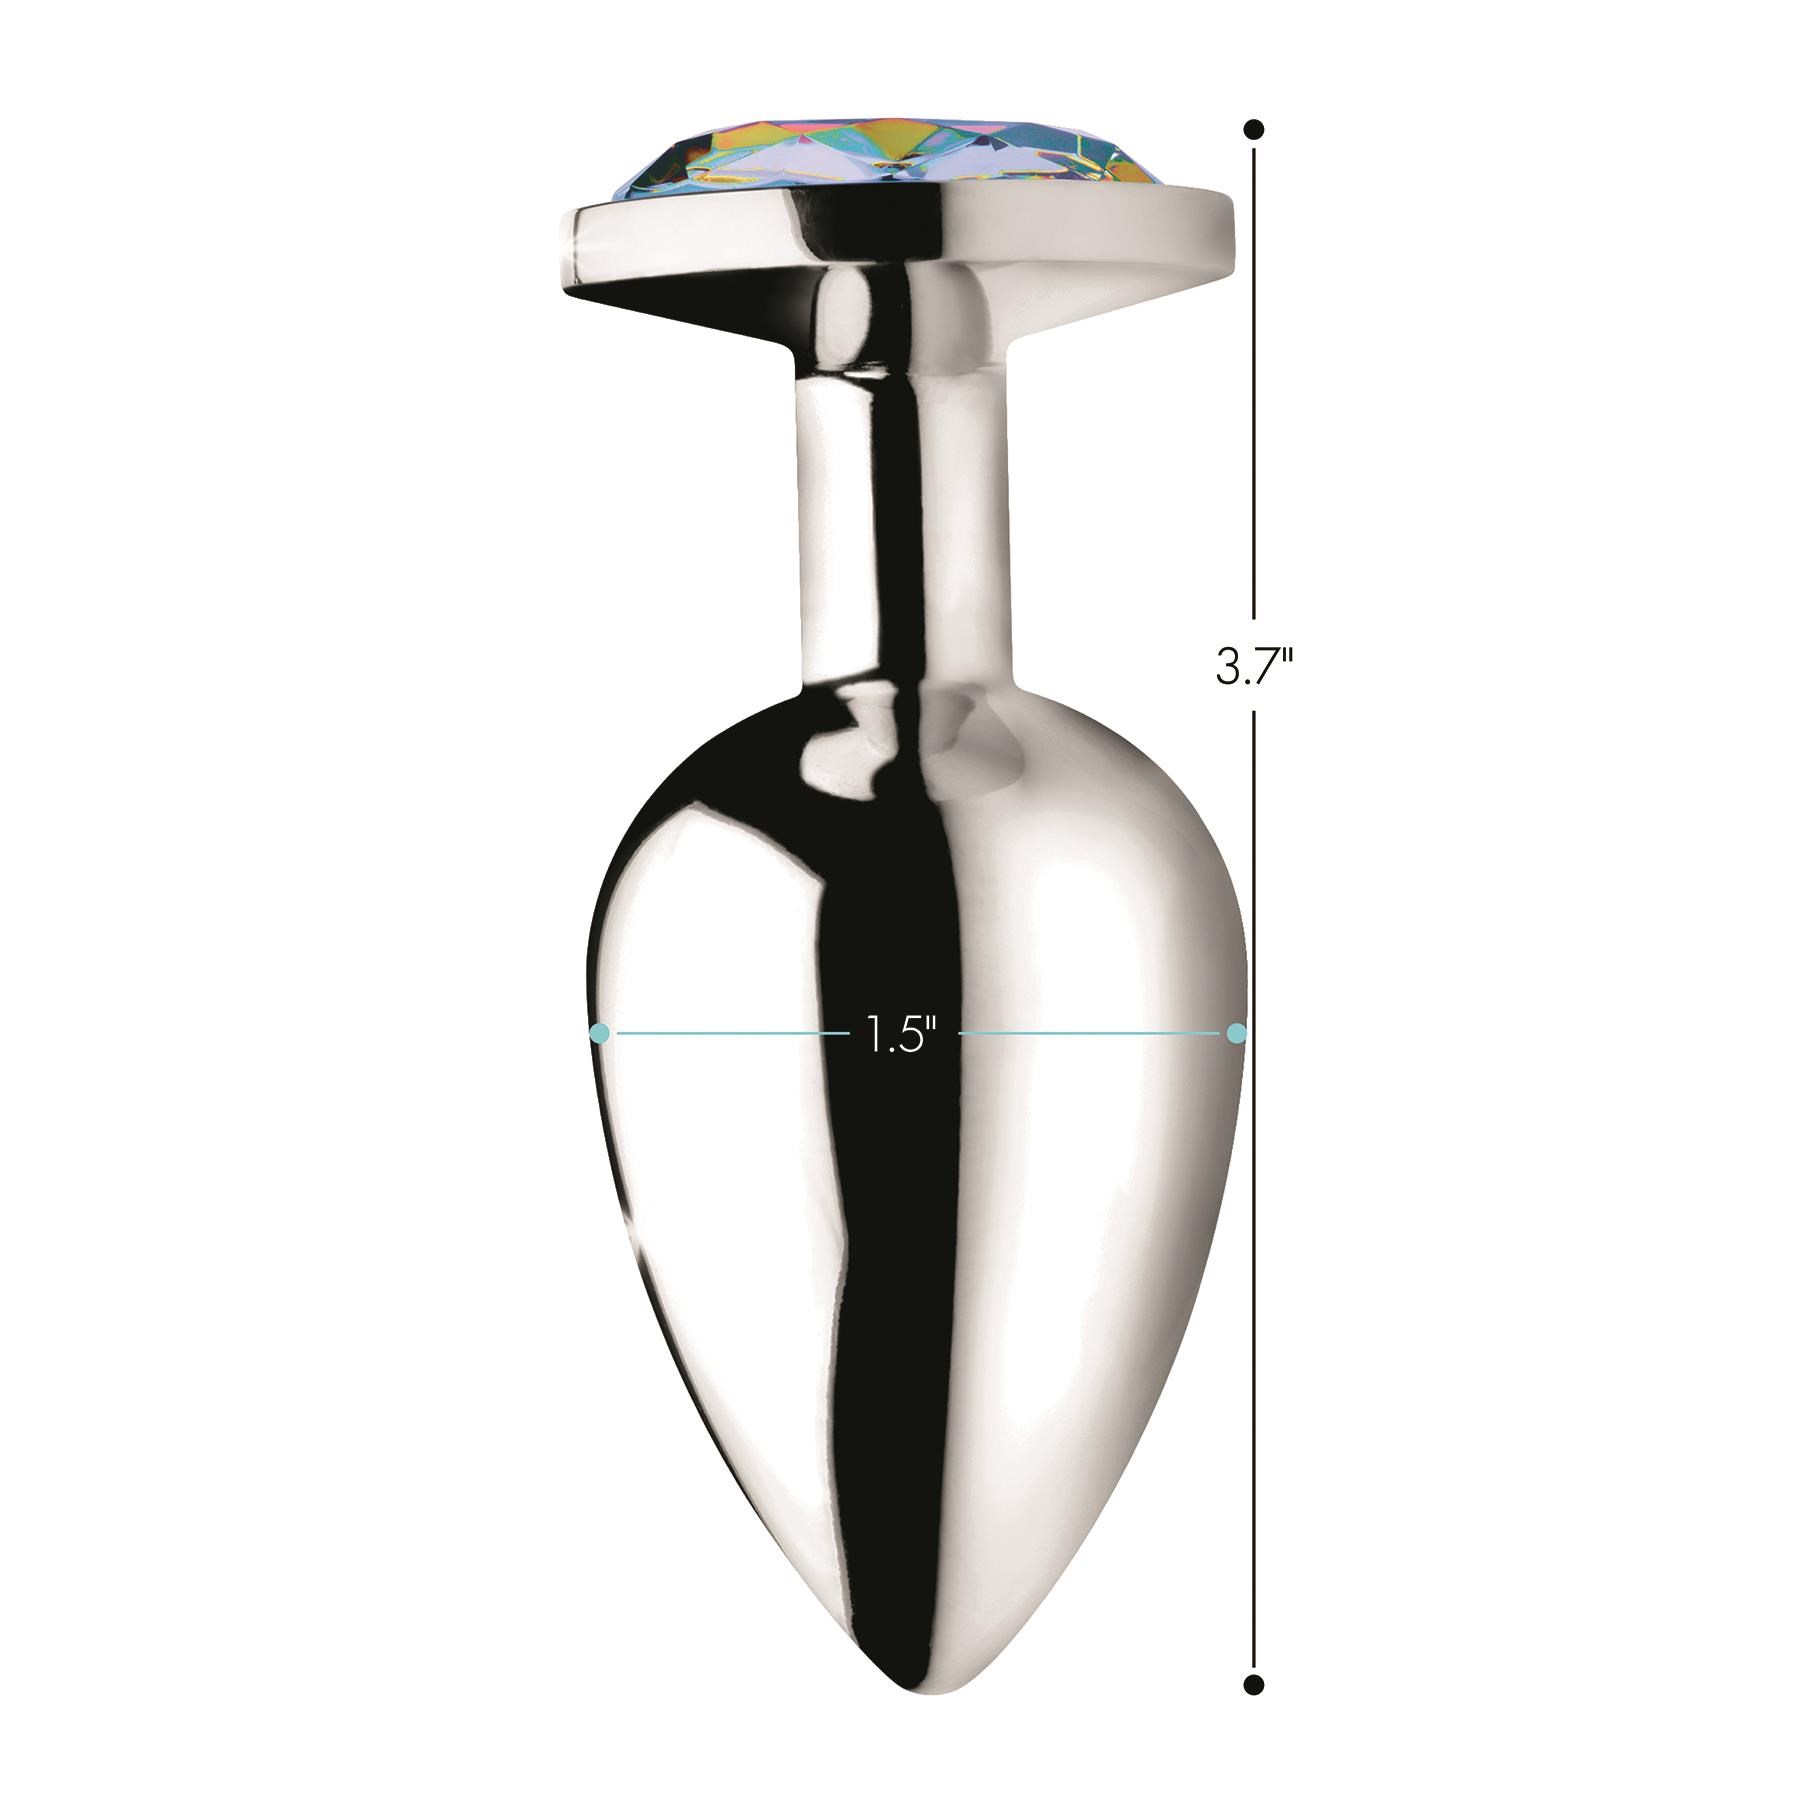 Rainbow Prism Gem Anal Plug - Product Shot With Dimensions -